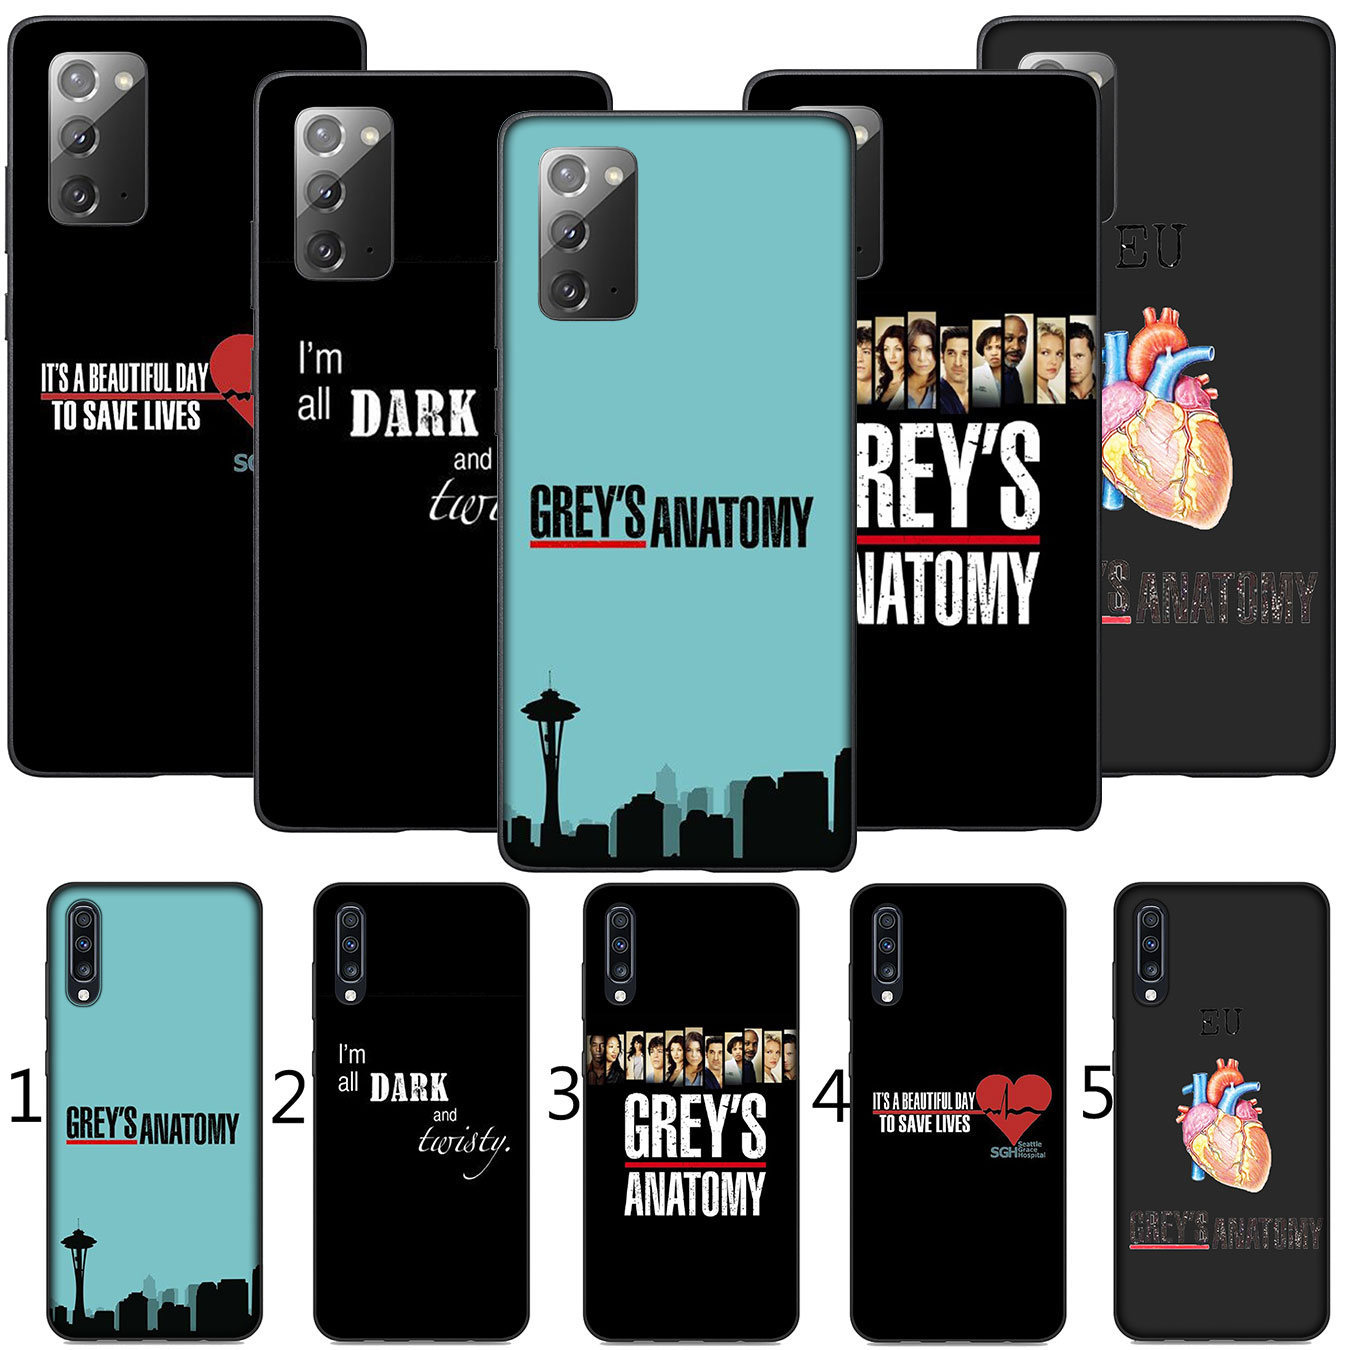 Samsung Galaxy S21 Ultra S8 Plus M31 M51 A11 A31 A51 S21+ S8+ S21Plus Phone Case Soft Silicone Casing Grey's Grey is Anatomy TV